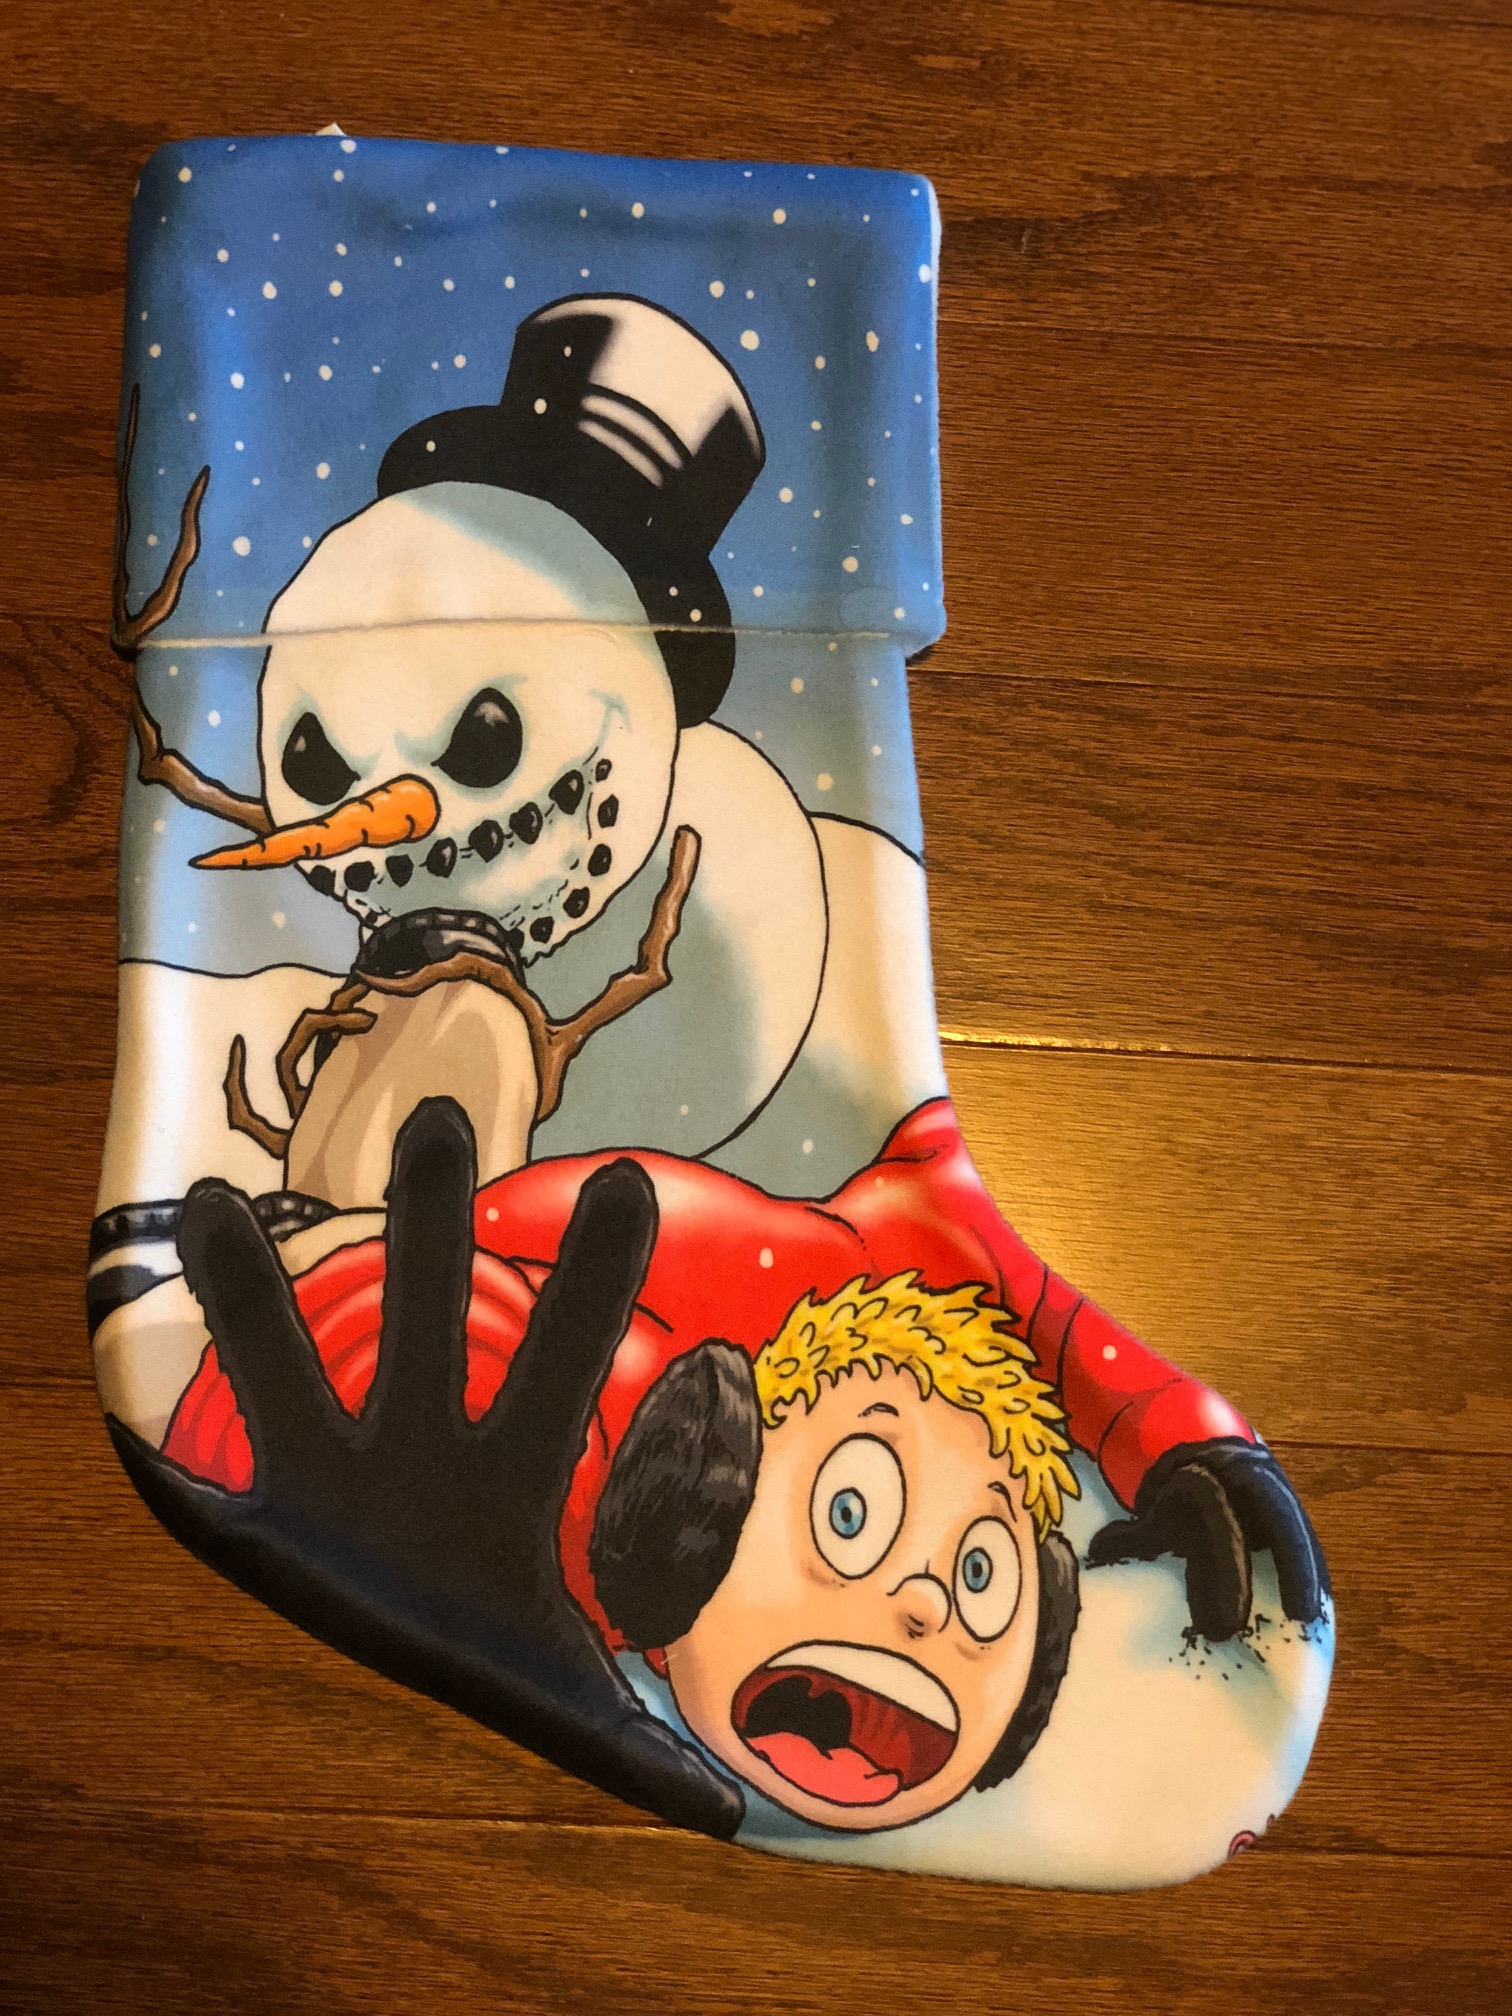 Revenge of Frosty made with sublimation printing